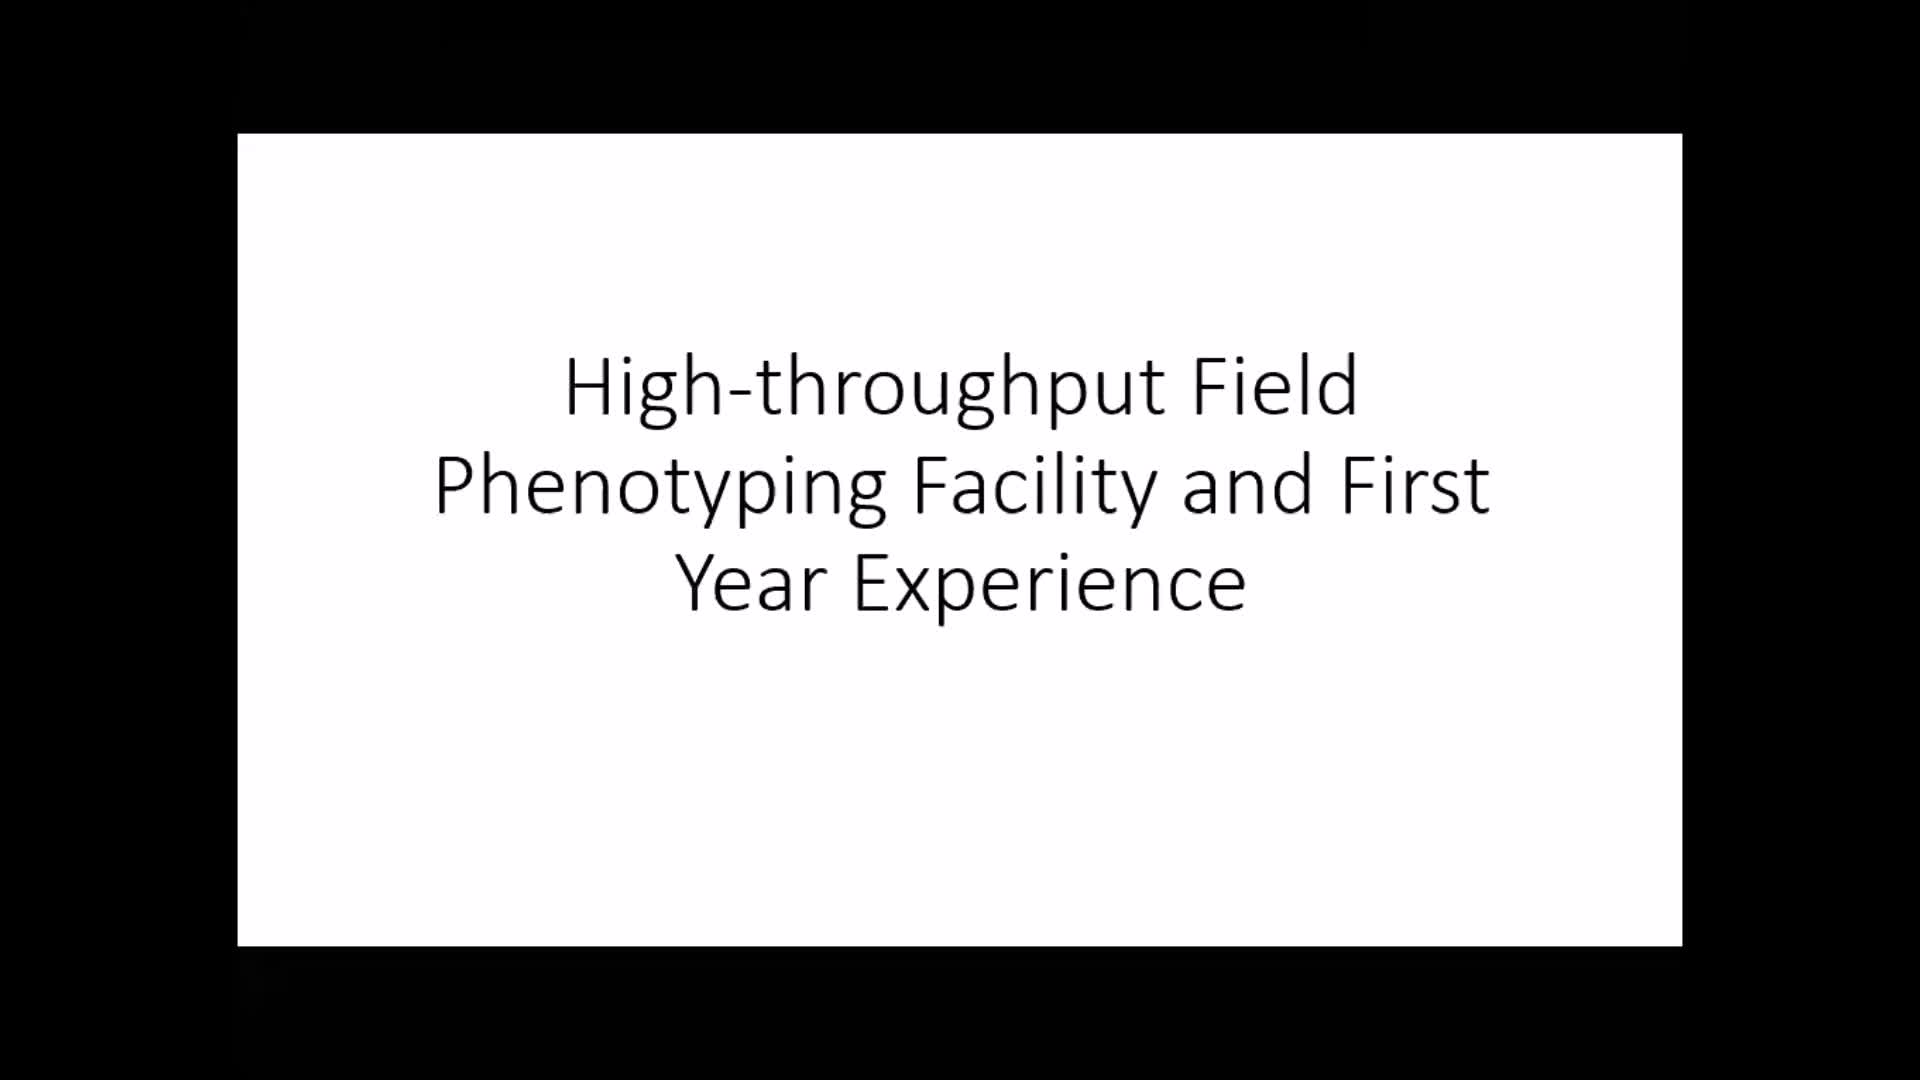  "High throughput field plant phenotyping facility and the first year experience"